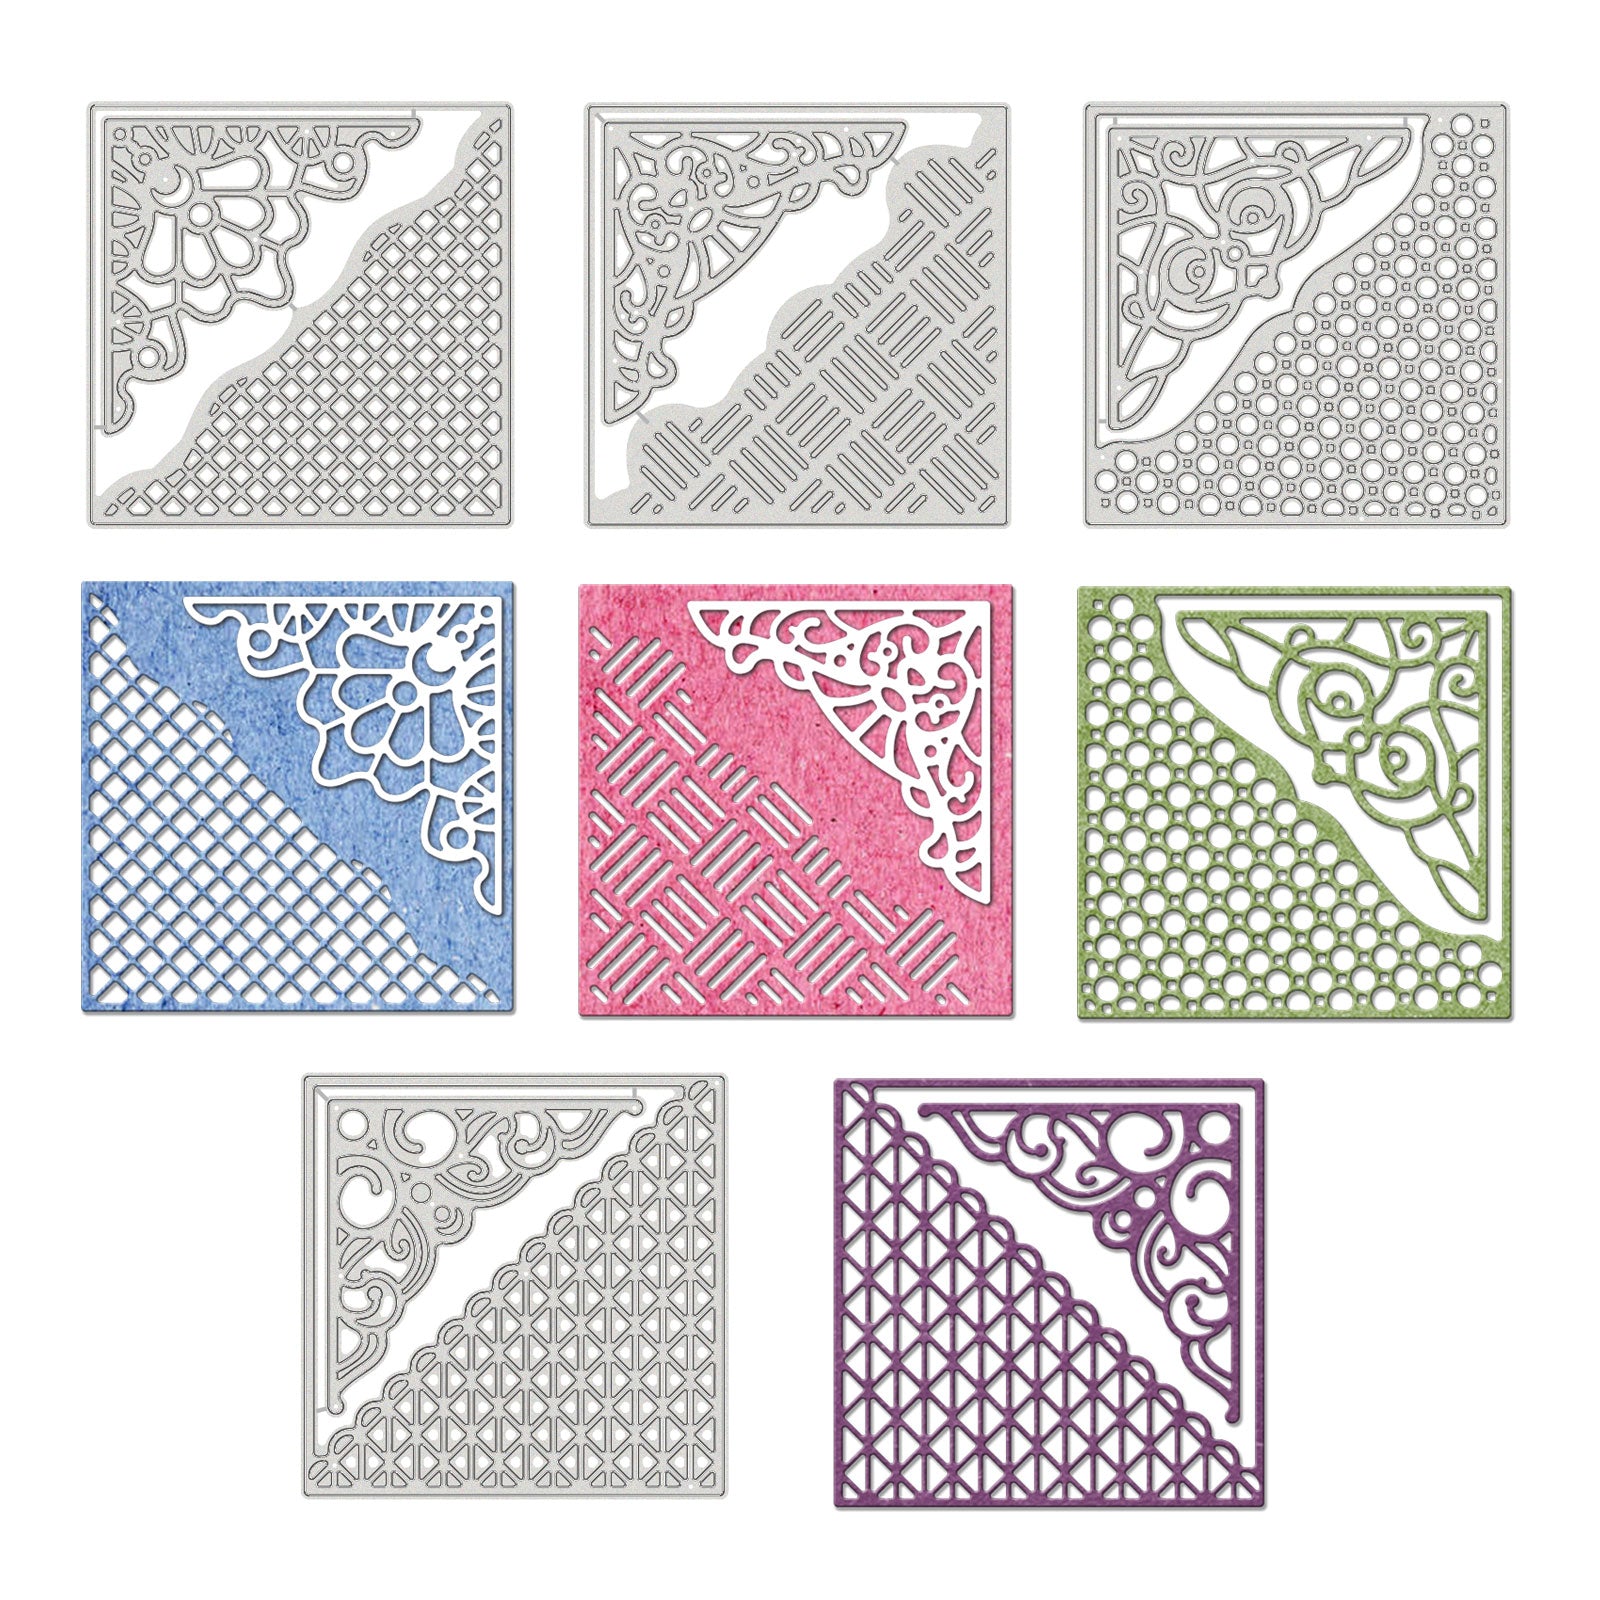 GLOBLELAND 4 Pieces Square Hollow Out Background Frame Cutting Dies Metal Corner Lace Die Embossing Stencils for DIY Card Scrapbooking Craft Album Paper Decor